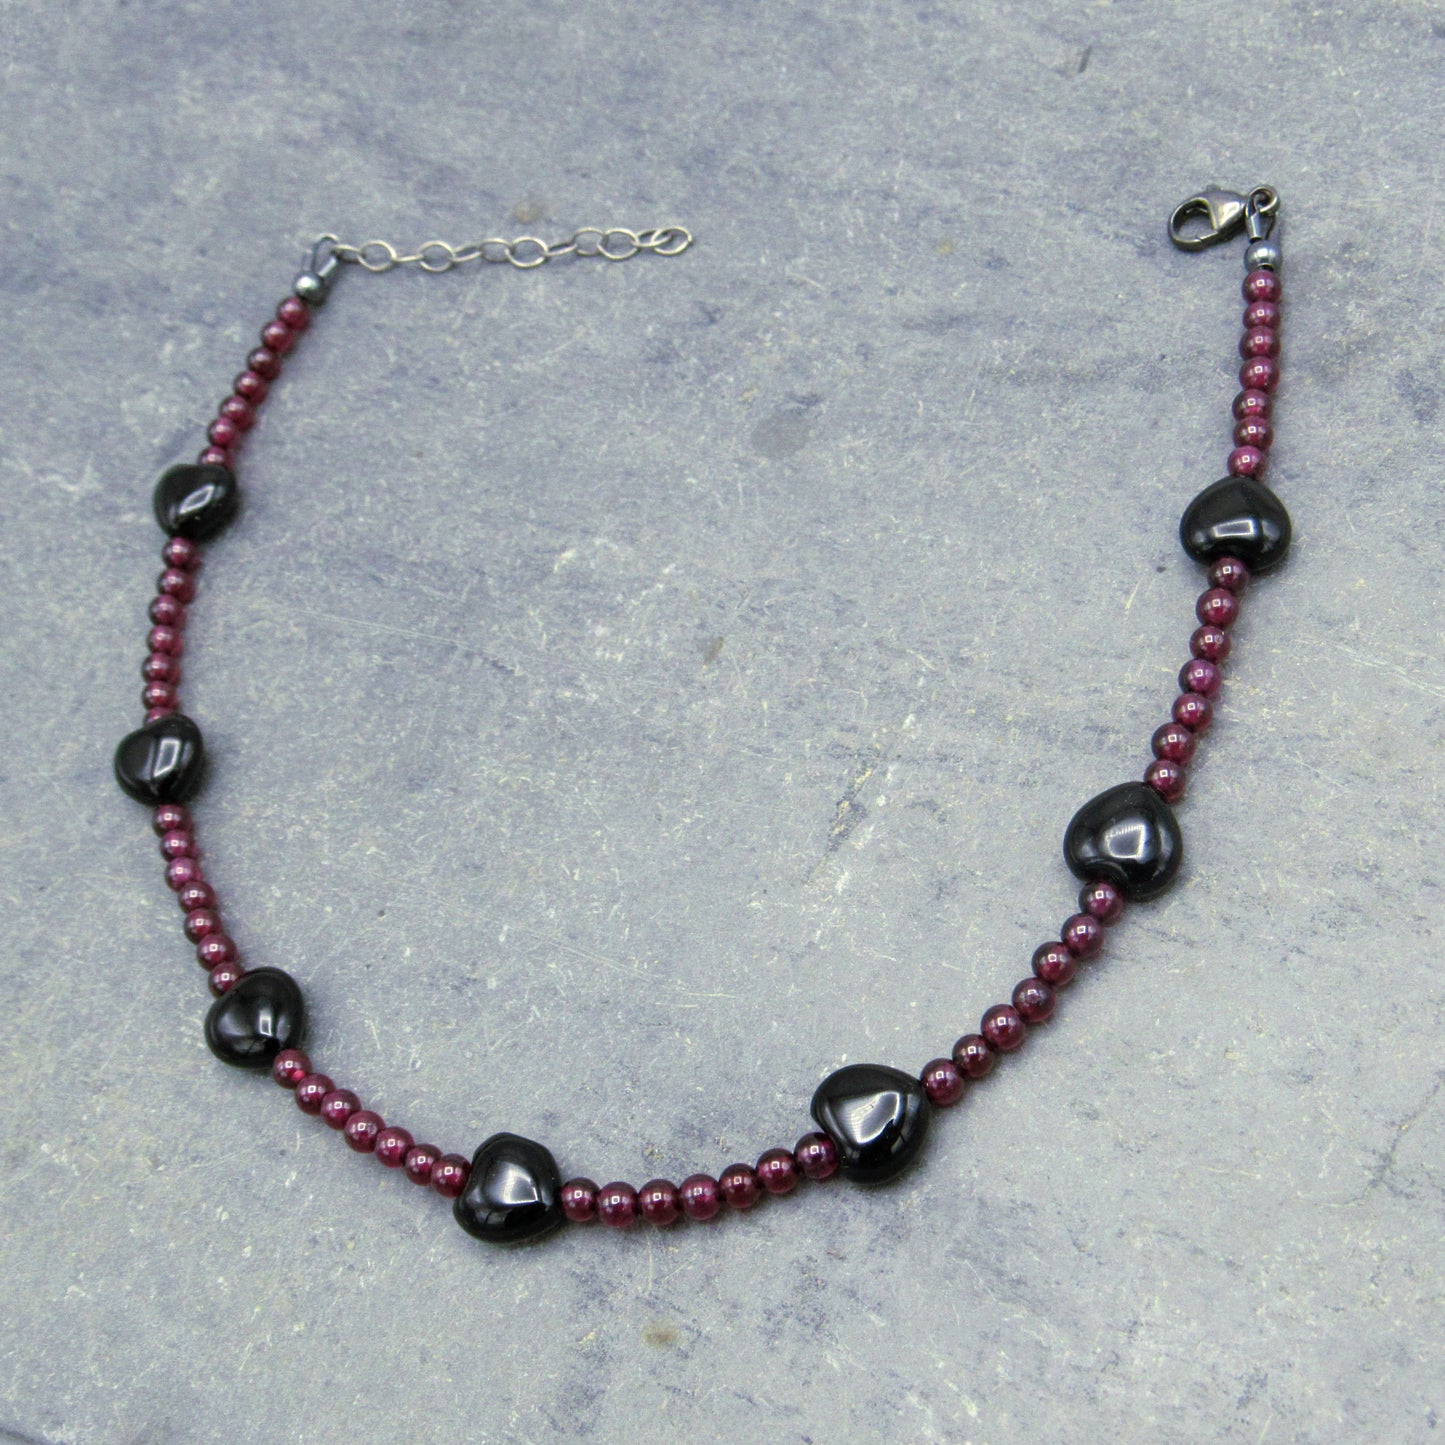 Garnet gemstones and Onyx Hearts Anklet with Oxidized Sterling